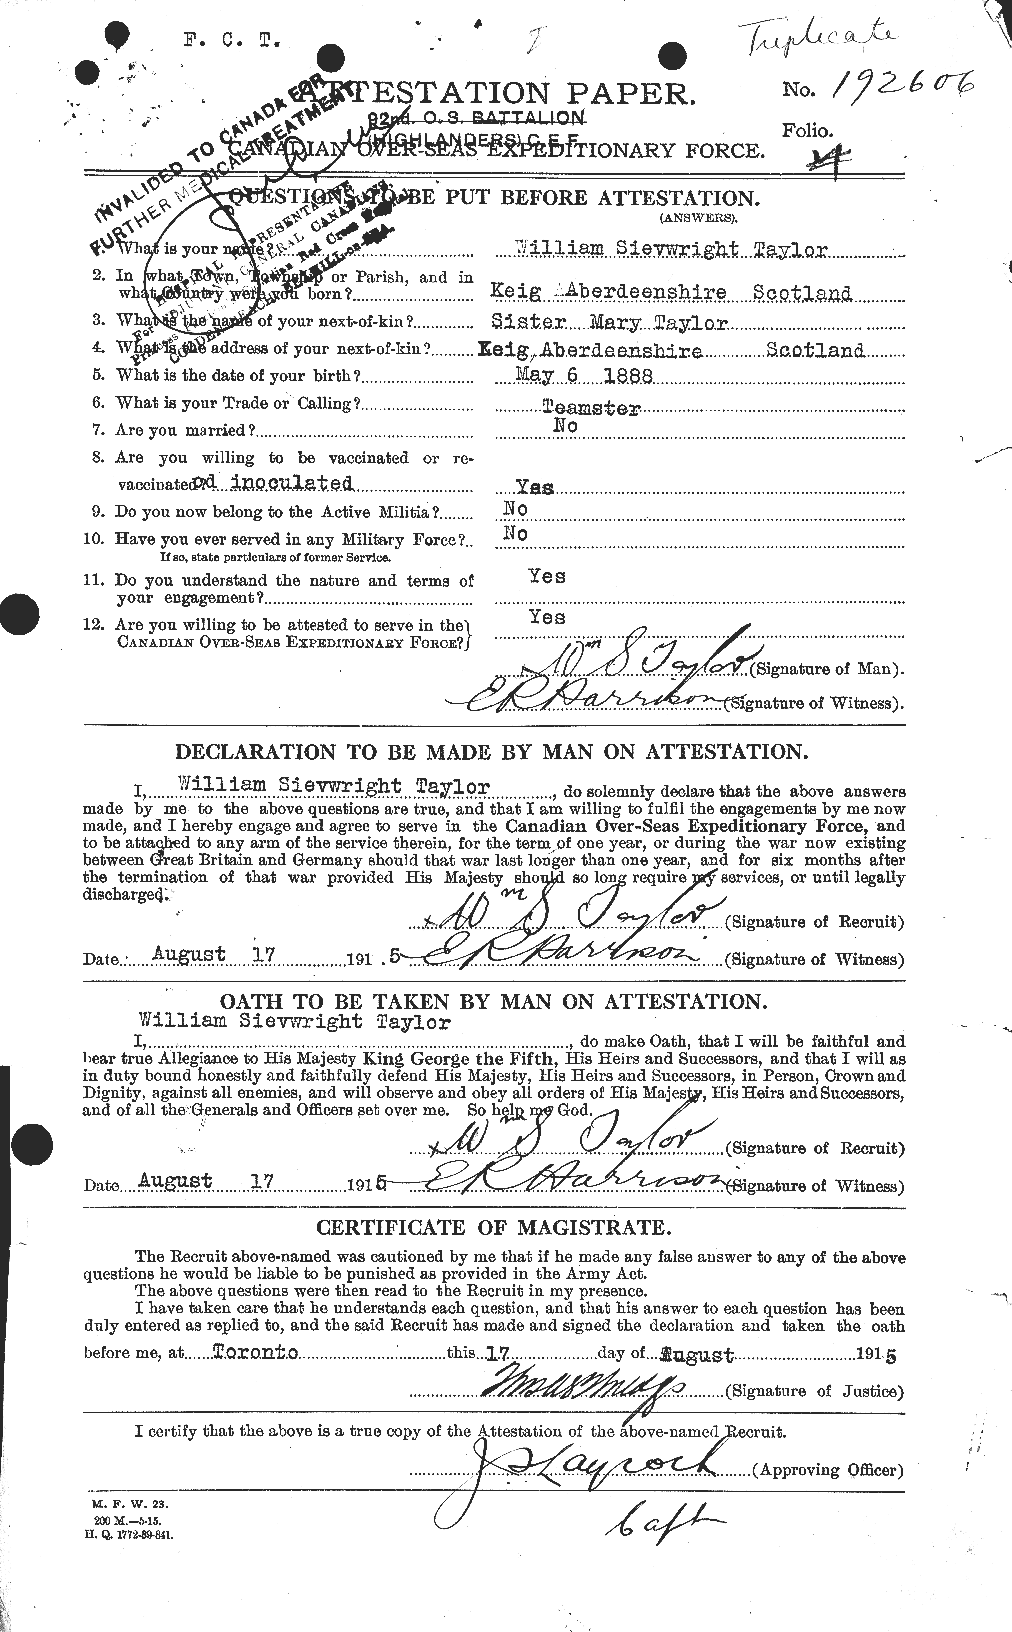 Personnel Records of the First World War - CEF 628348a